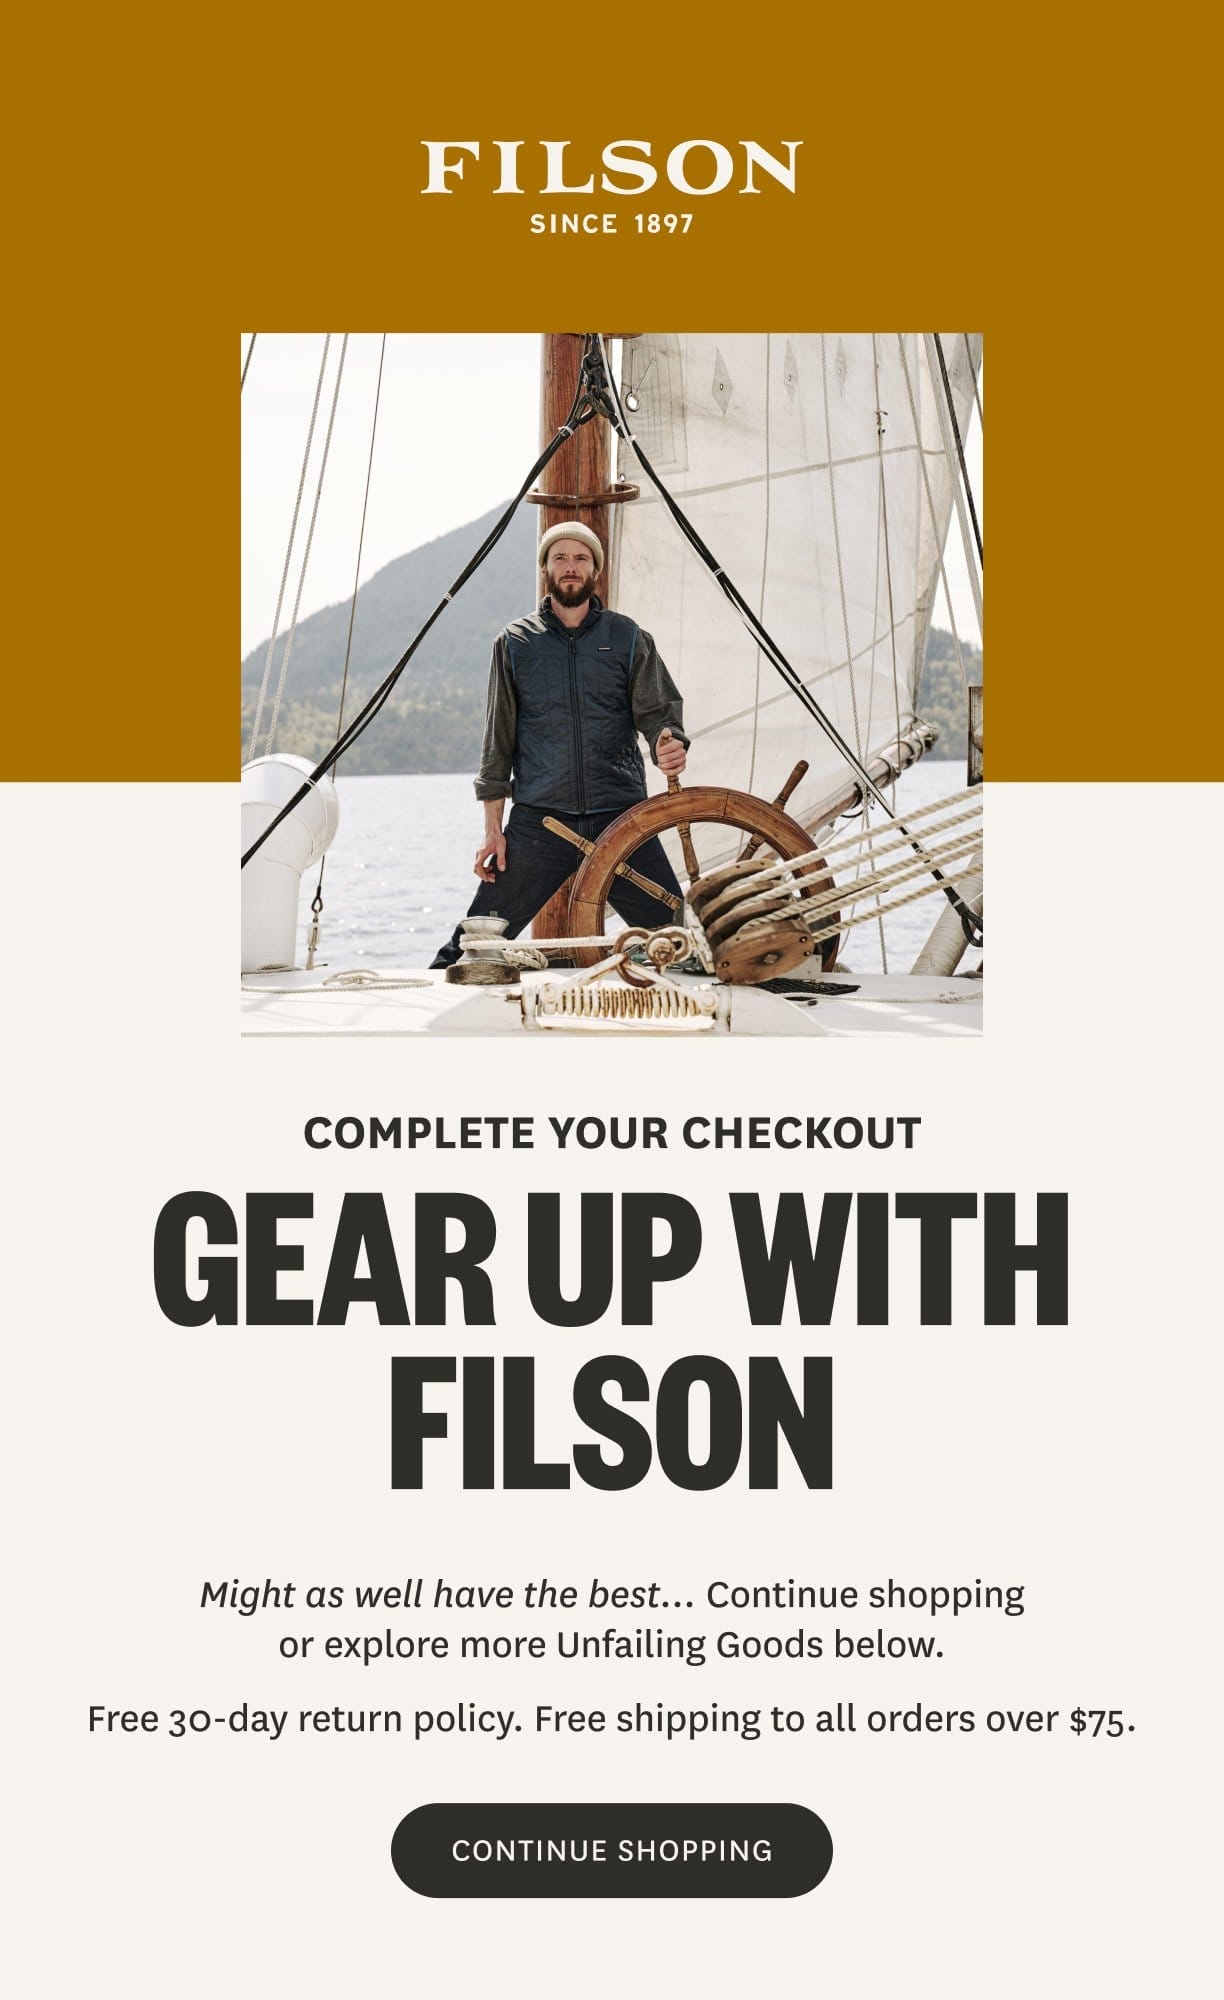 MIGHT AS WELL HAVE THE BEST... GEAR UP WITH FILSON